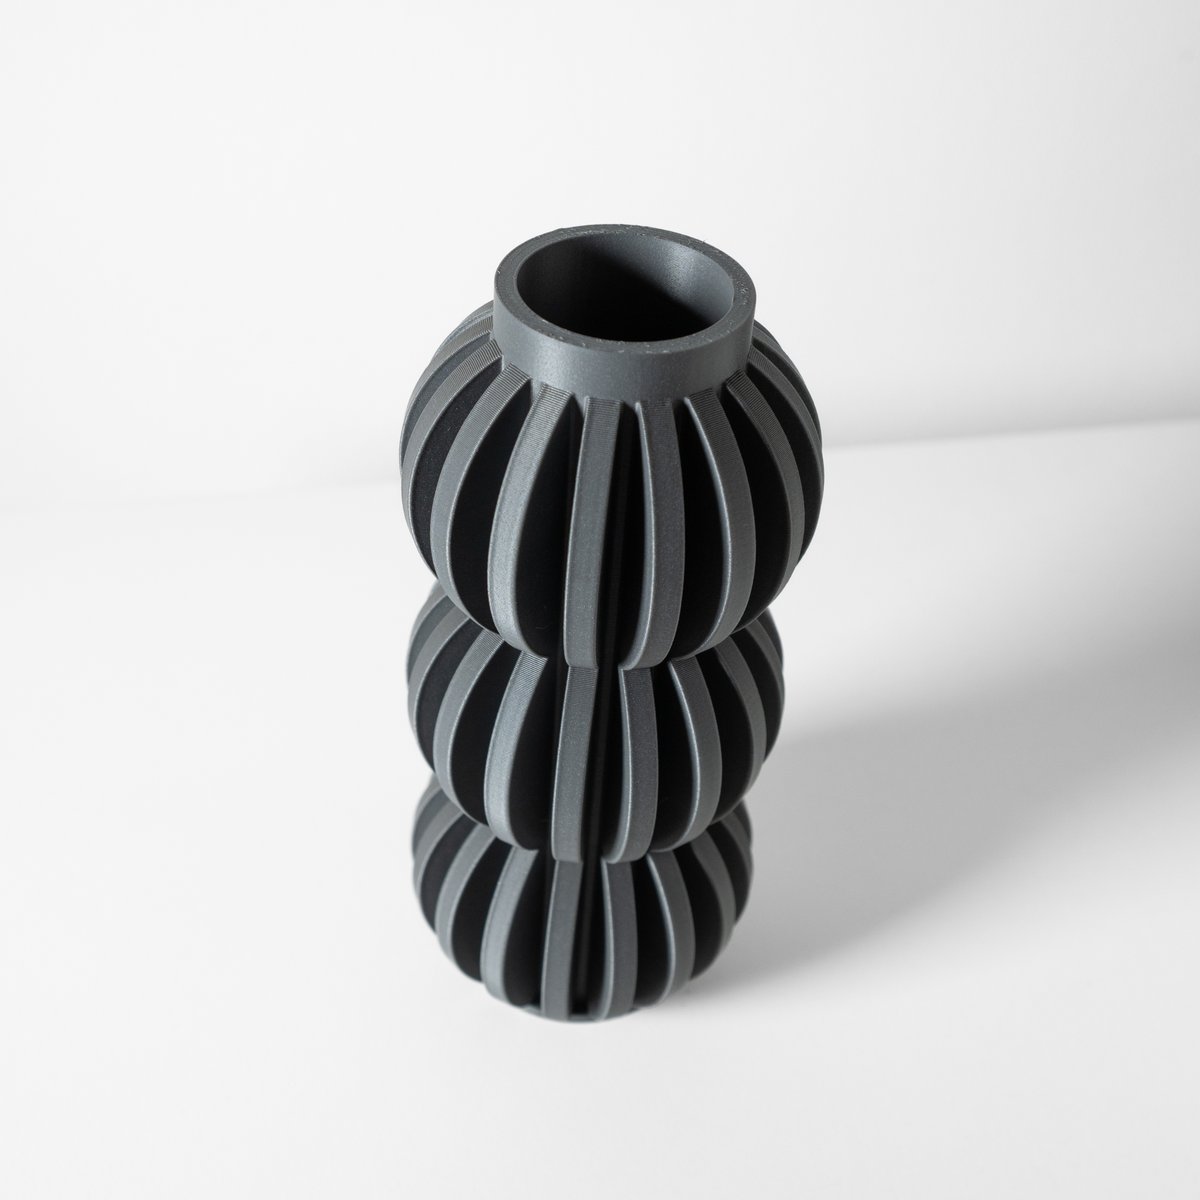 The Alura Vase, 3D Printed by Terra de Verdant. Free STL download and commercial license available at @Thangs3D: than.gs/m/1061584 Explore our profile on Thangs for a wide range of home decor items including planters, vases, pen holders, and more!